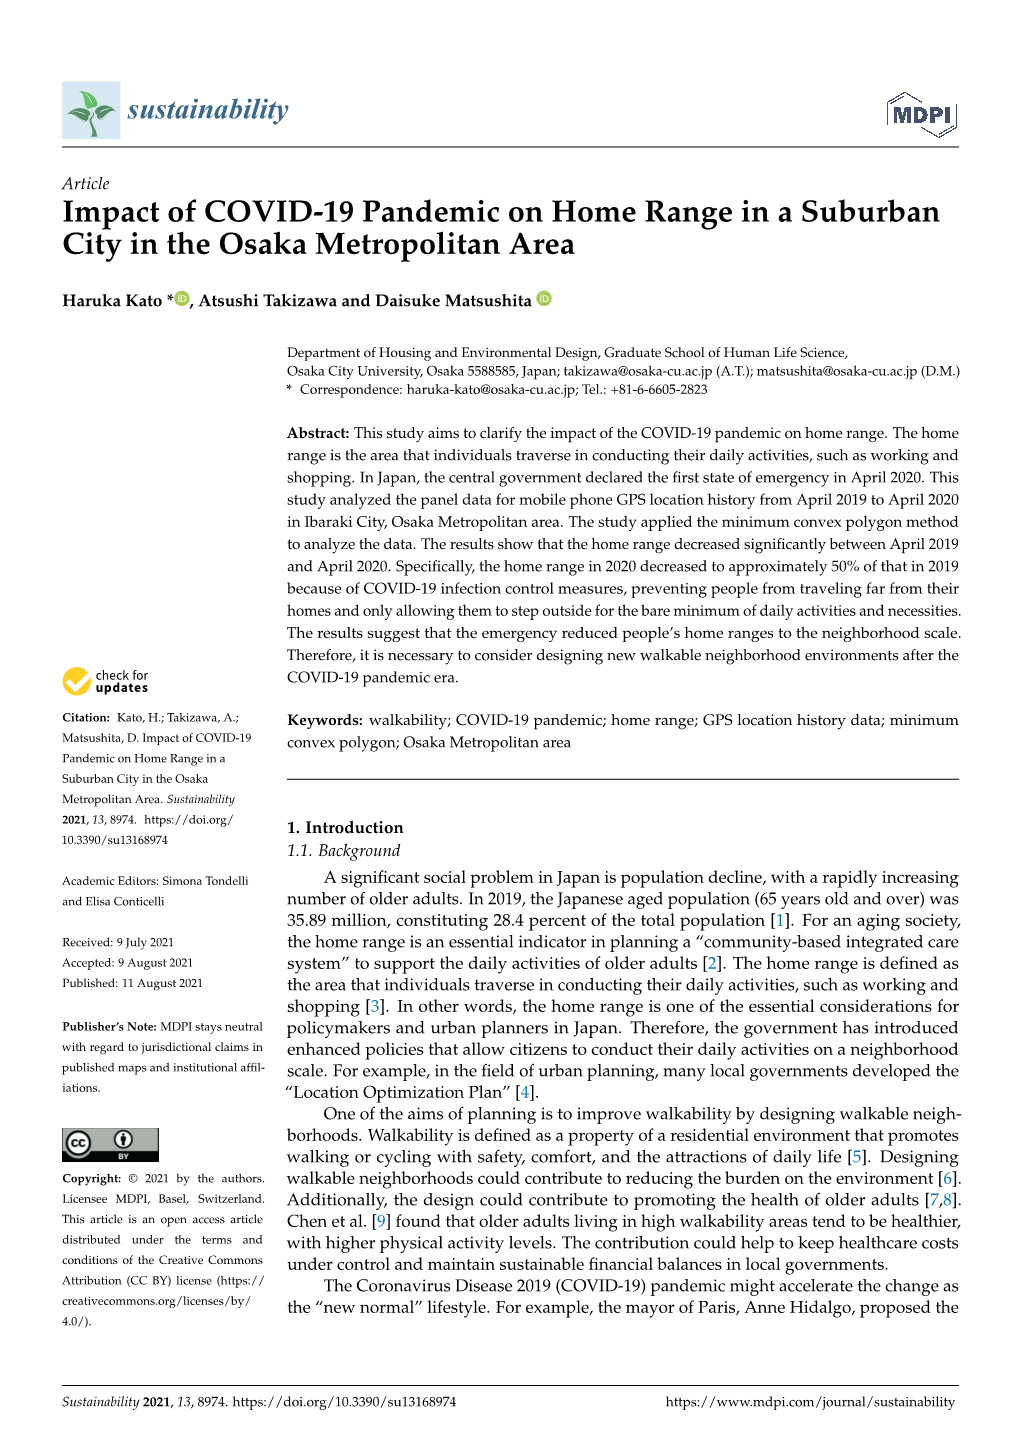 Impact of COVID-19 Pandemic on Home Range in a Suburban City in the Osaka Metropolitan Area